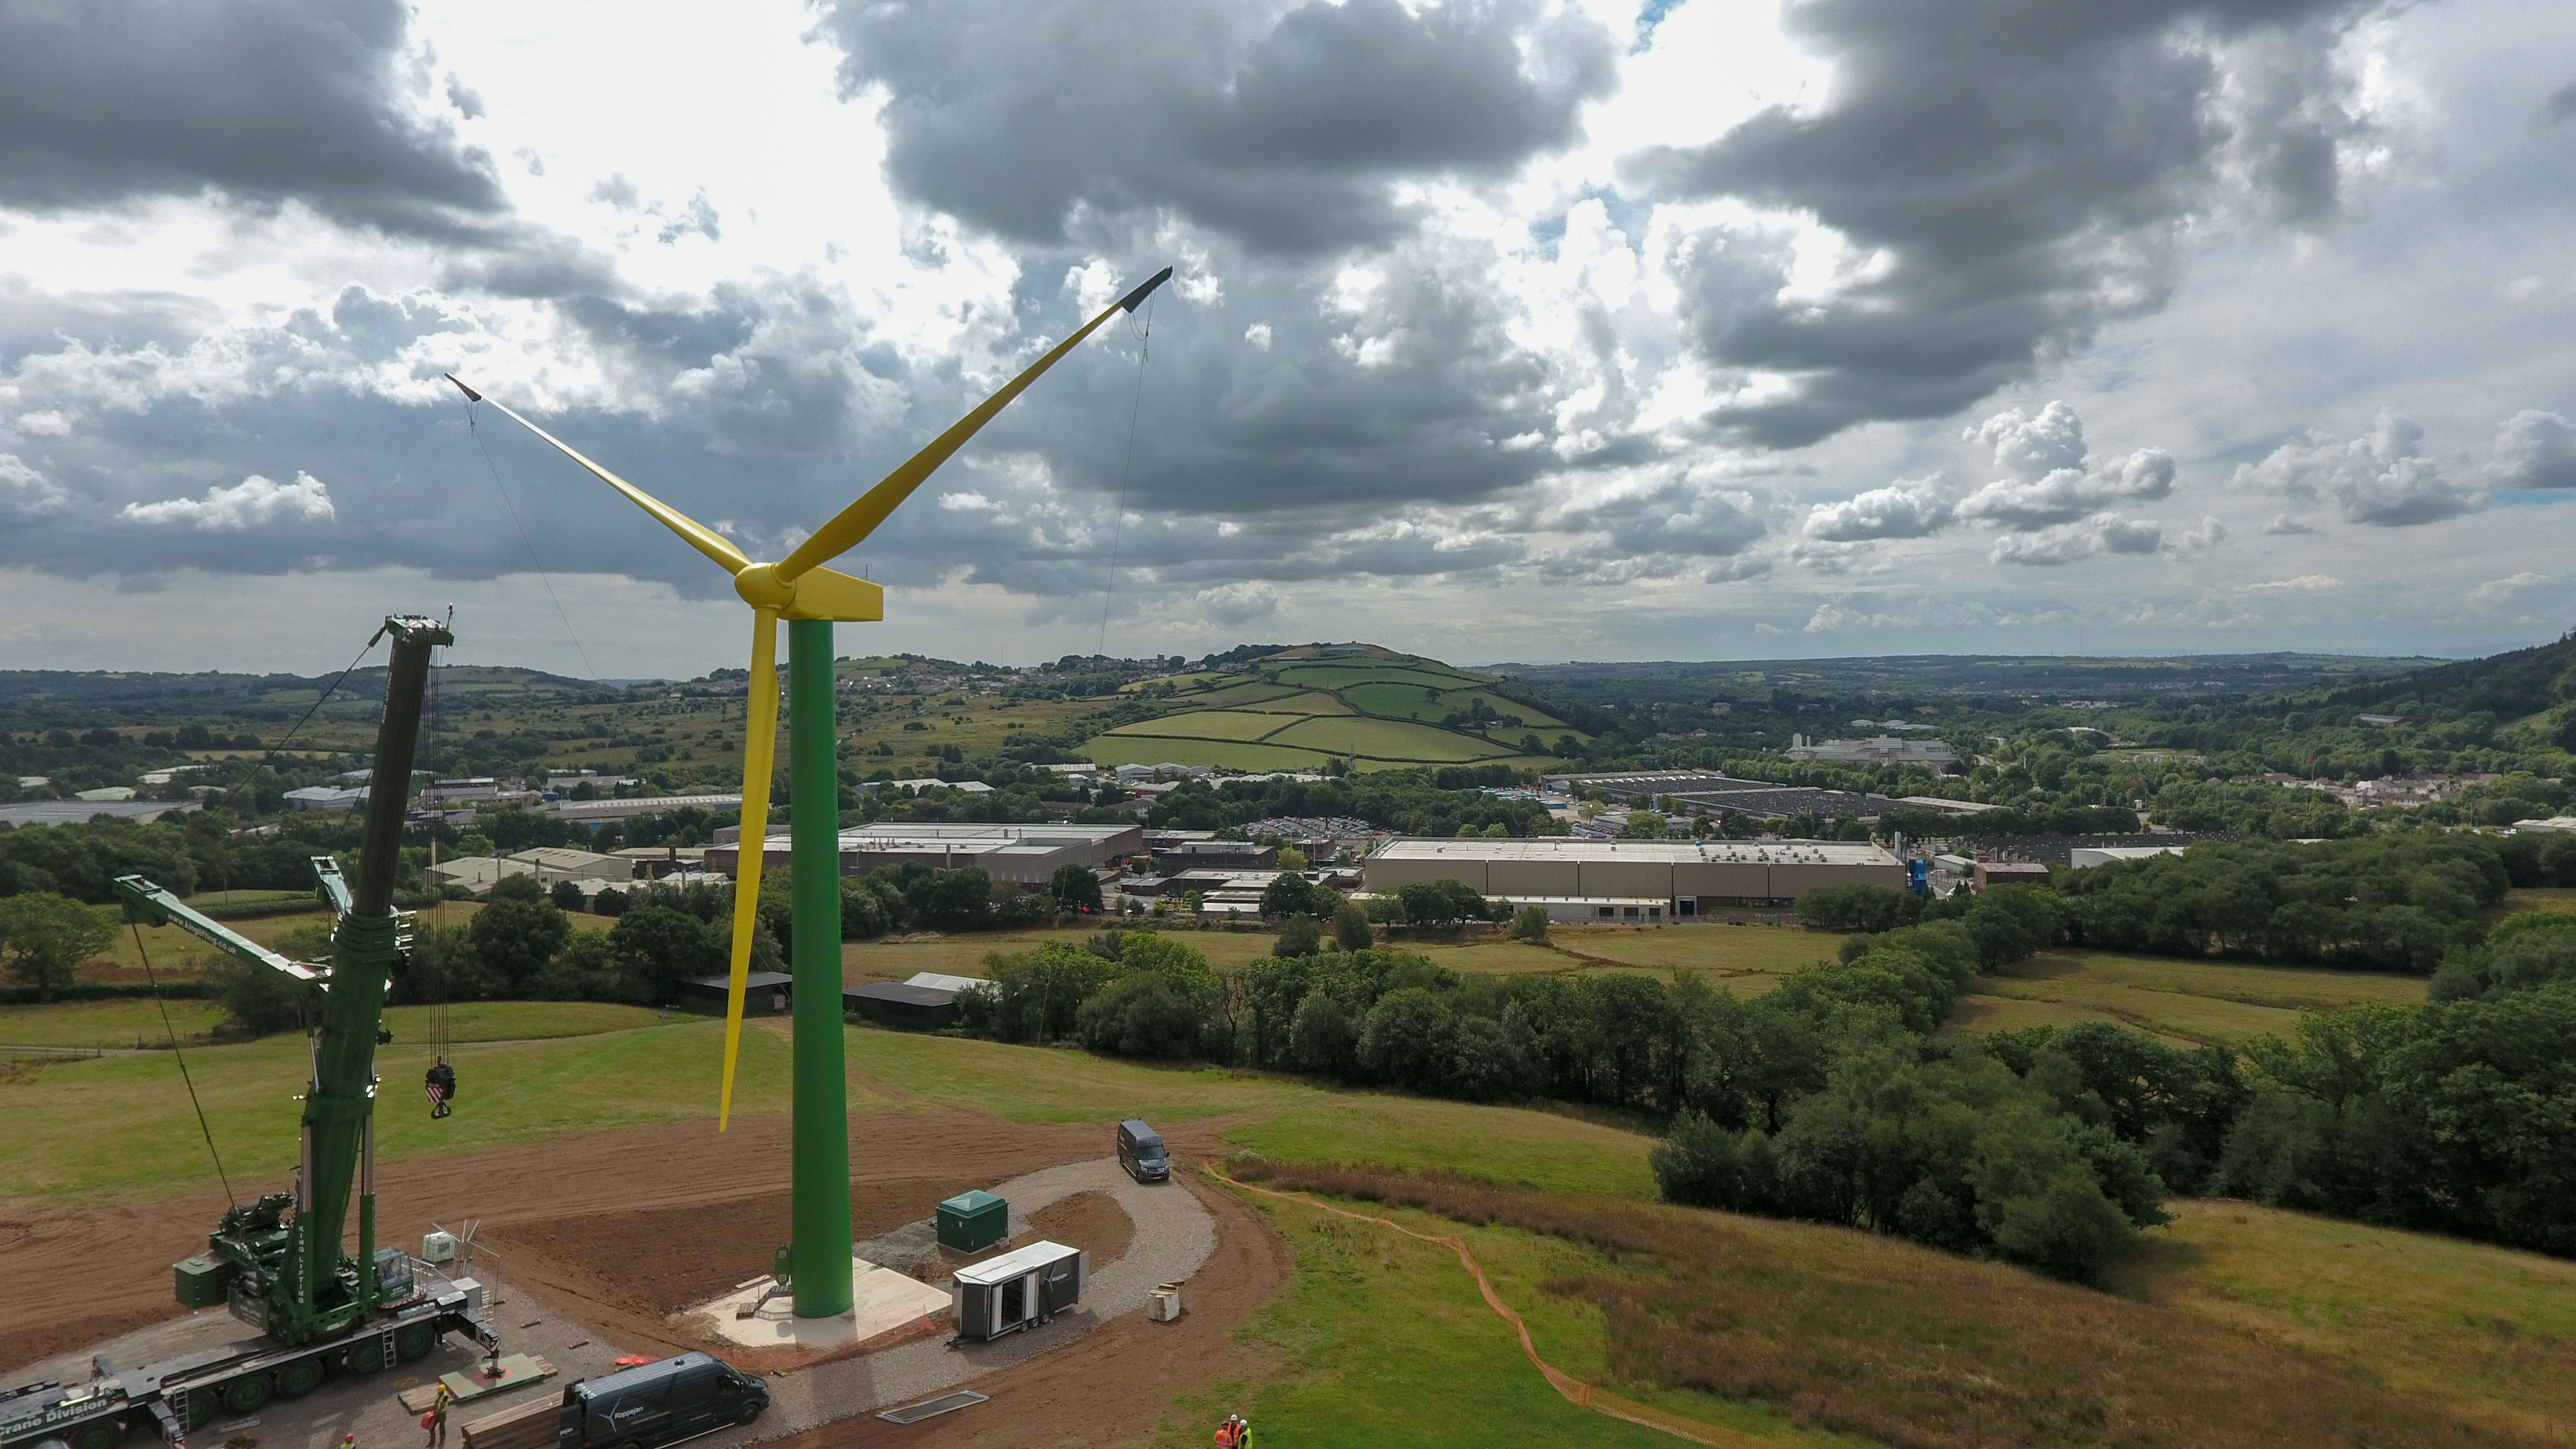 The "daffodil" wind turbine on hills behind the Royal Mint in Llantrisant